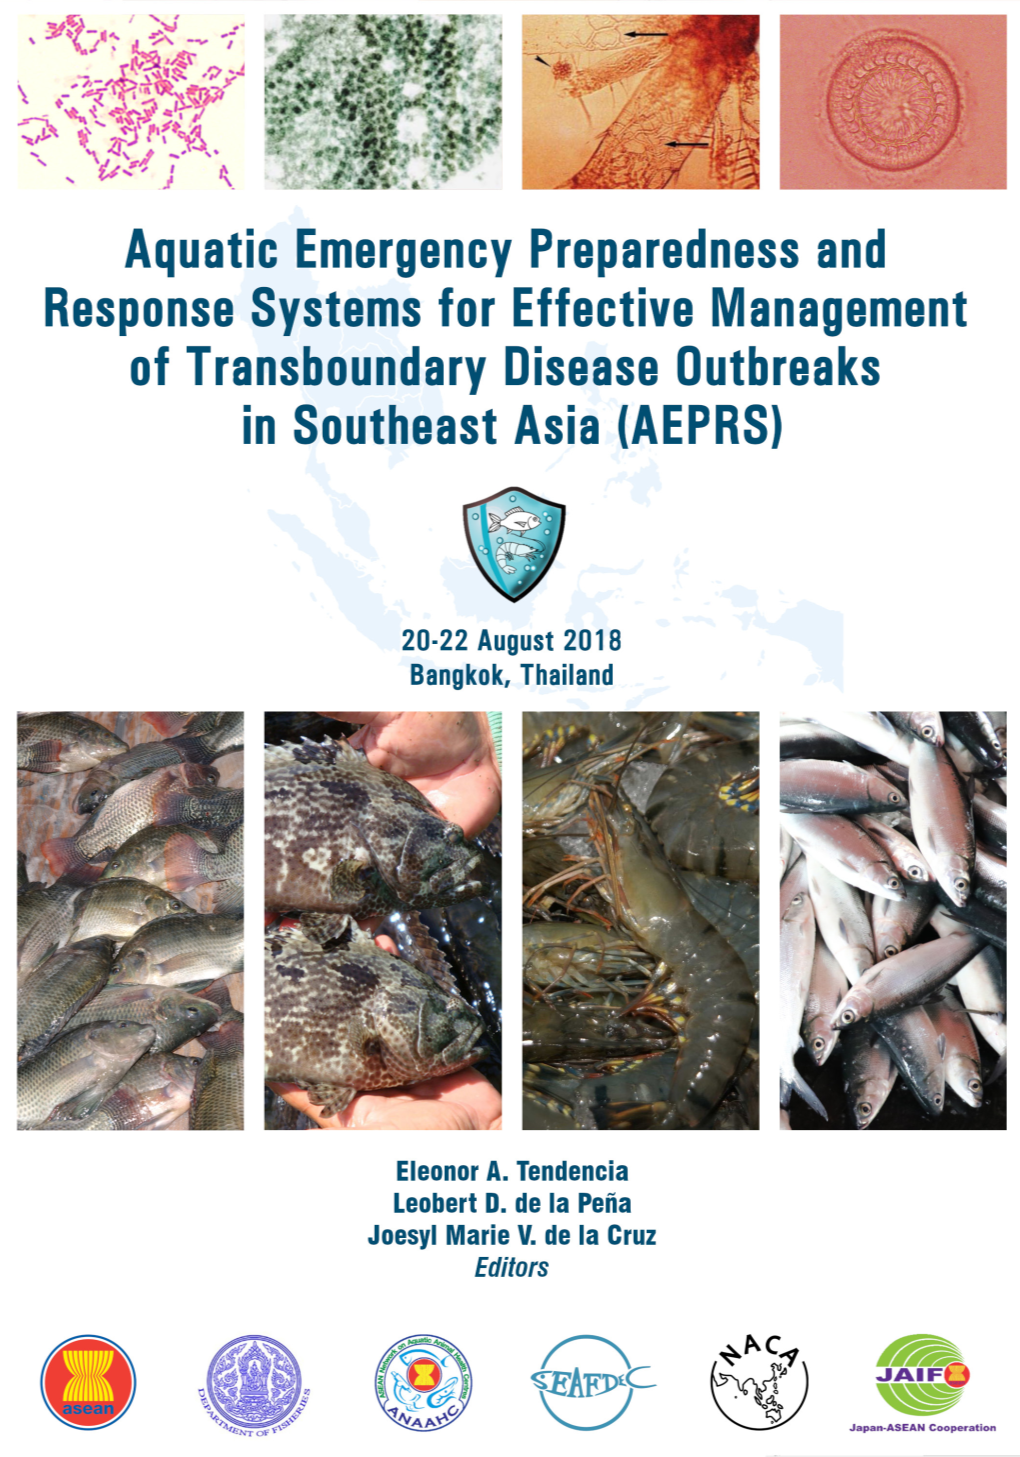 Aquatic Emergency Preparedness and Response Systems for Effective Management of Transboundary Disease Outbreaks in Southeast Asia